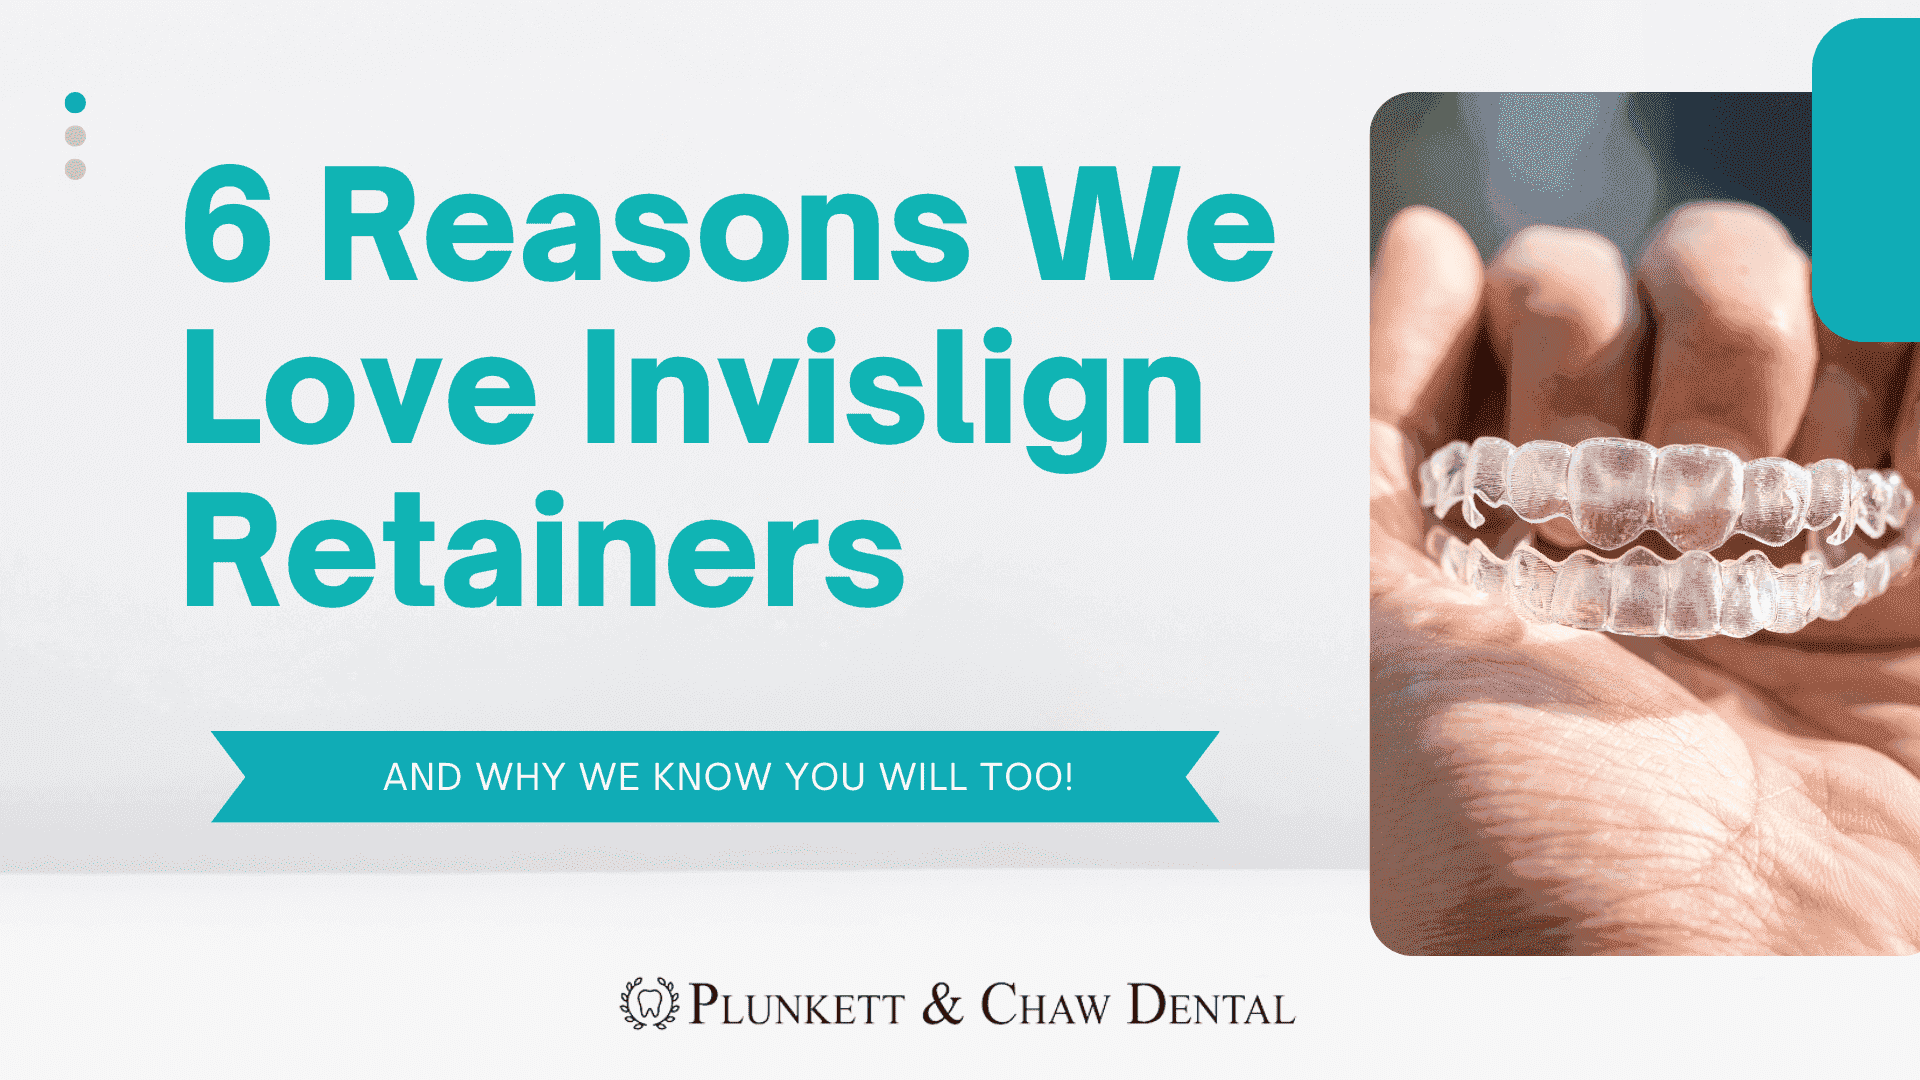 6 Reasons Why You Need Invisalign Retainers